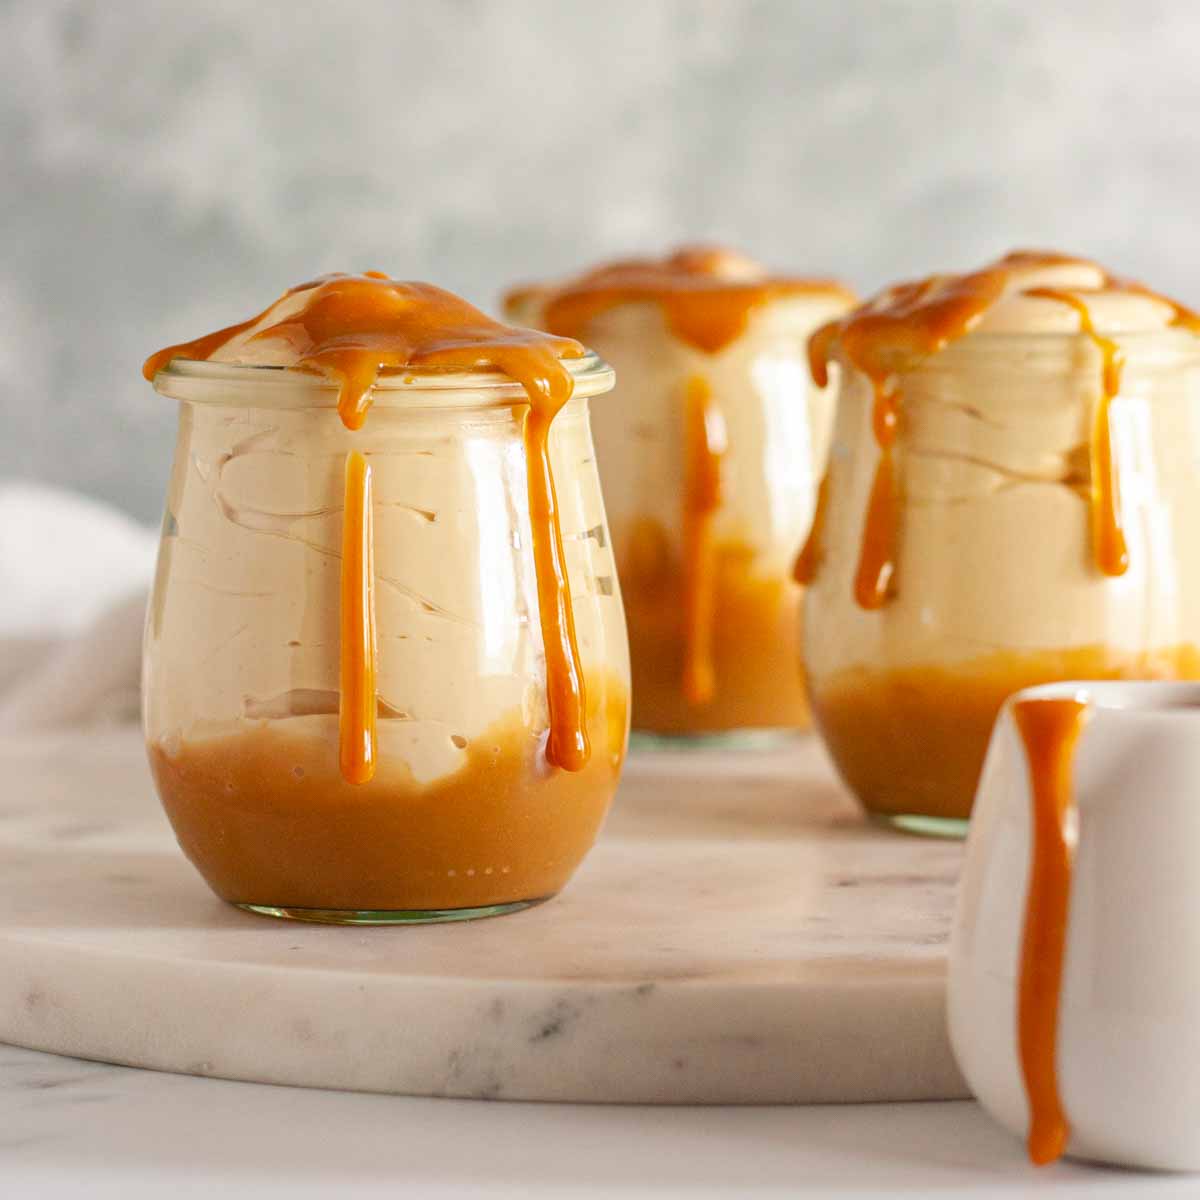 Dulce de leche mousse in three dessert jars and topped with dulce de leche.